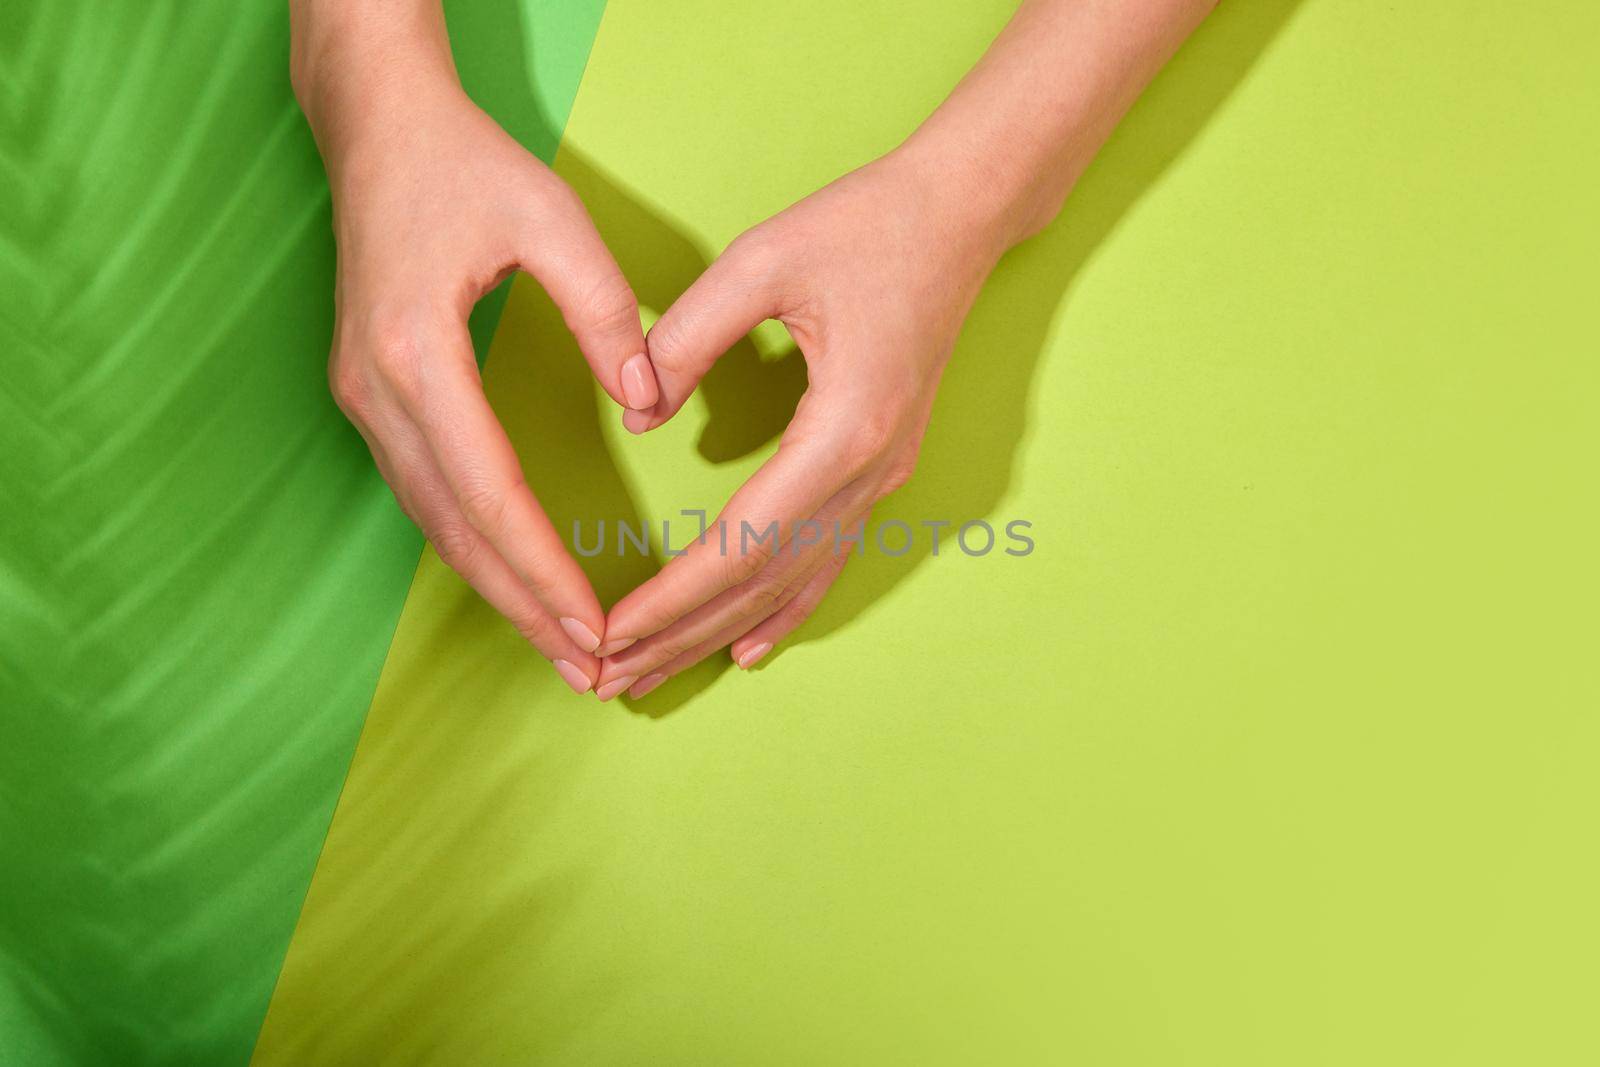 Hands making heart symbol on green background by Demkat